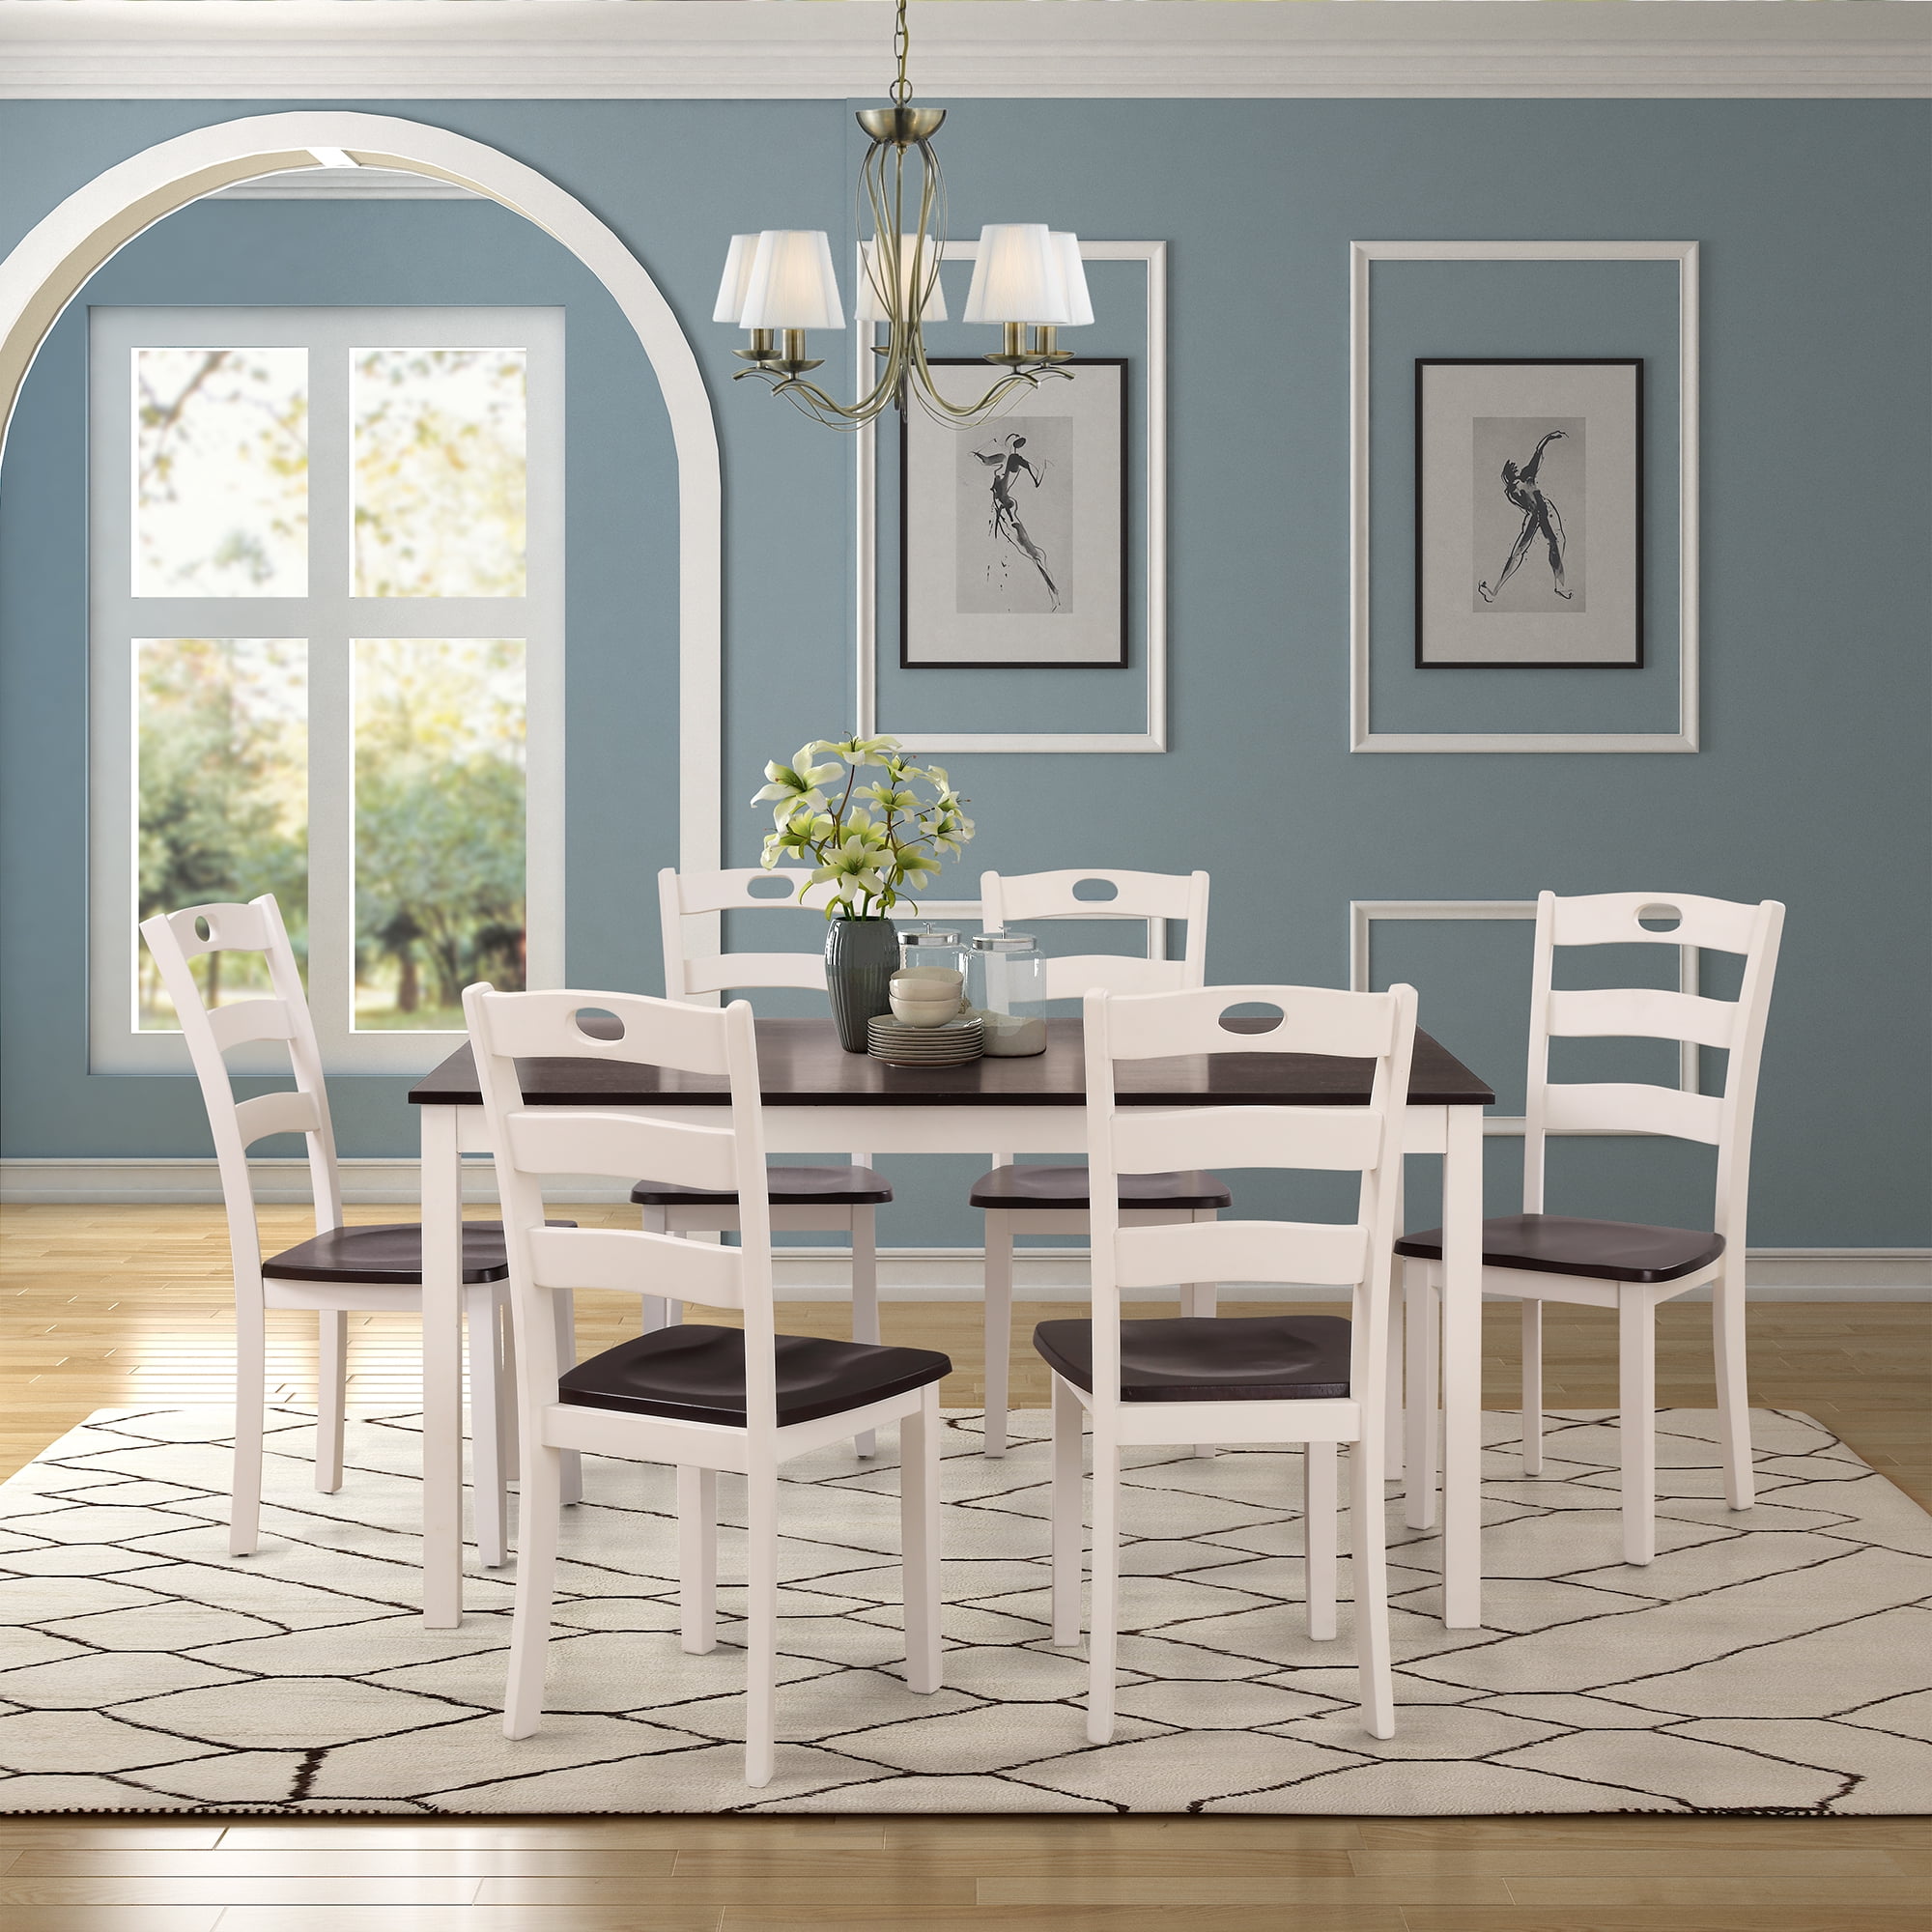 White Dining Table Set 20 Piece Clearance, 20 OFF   solsumca.com